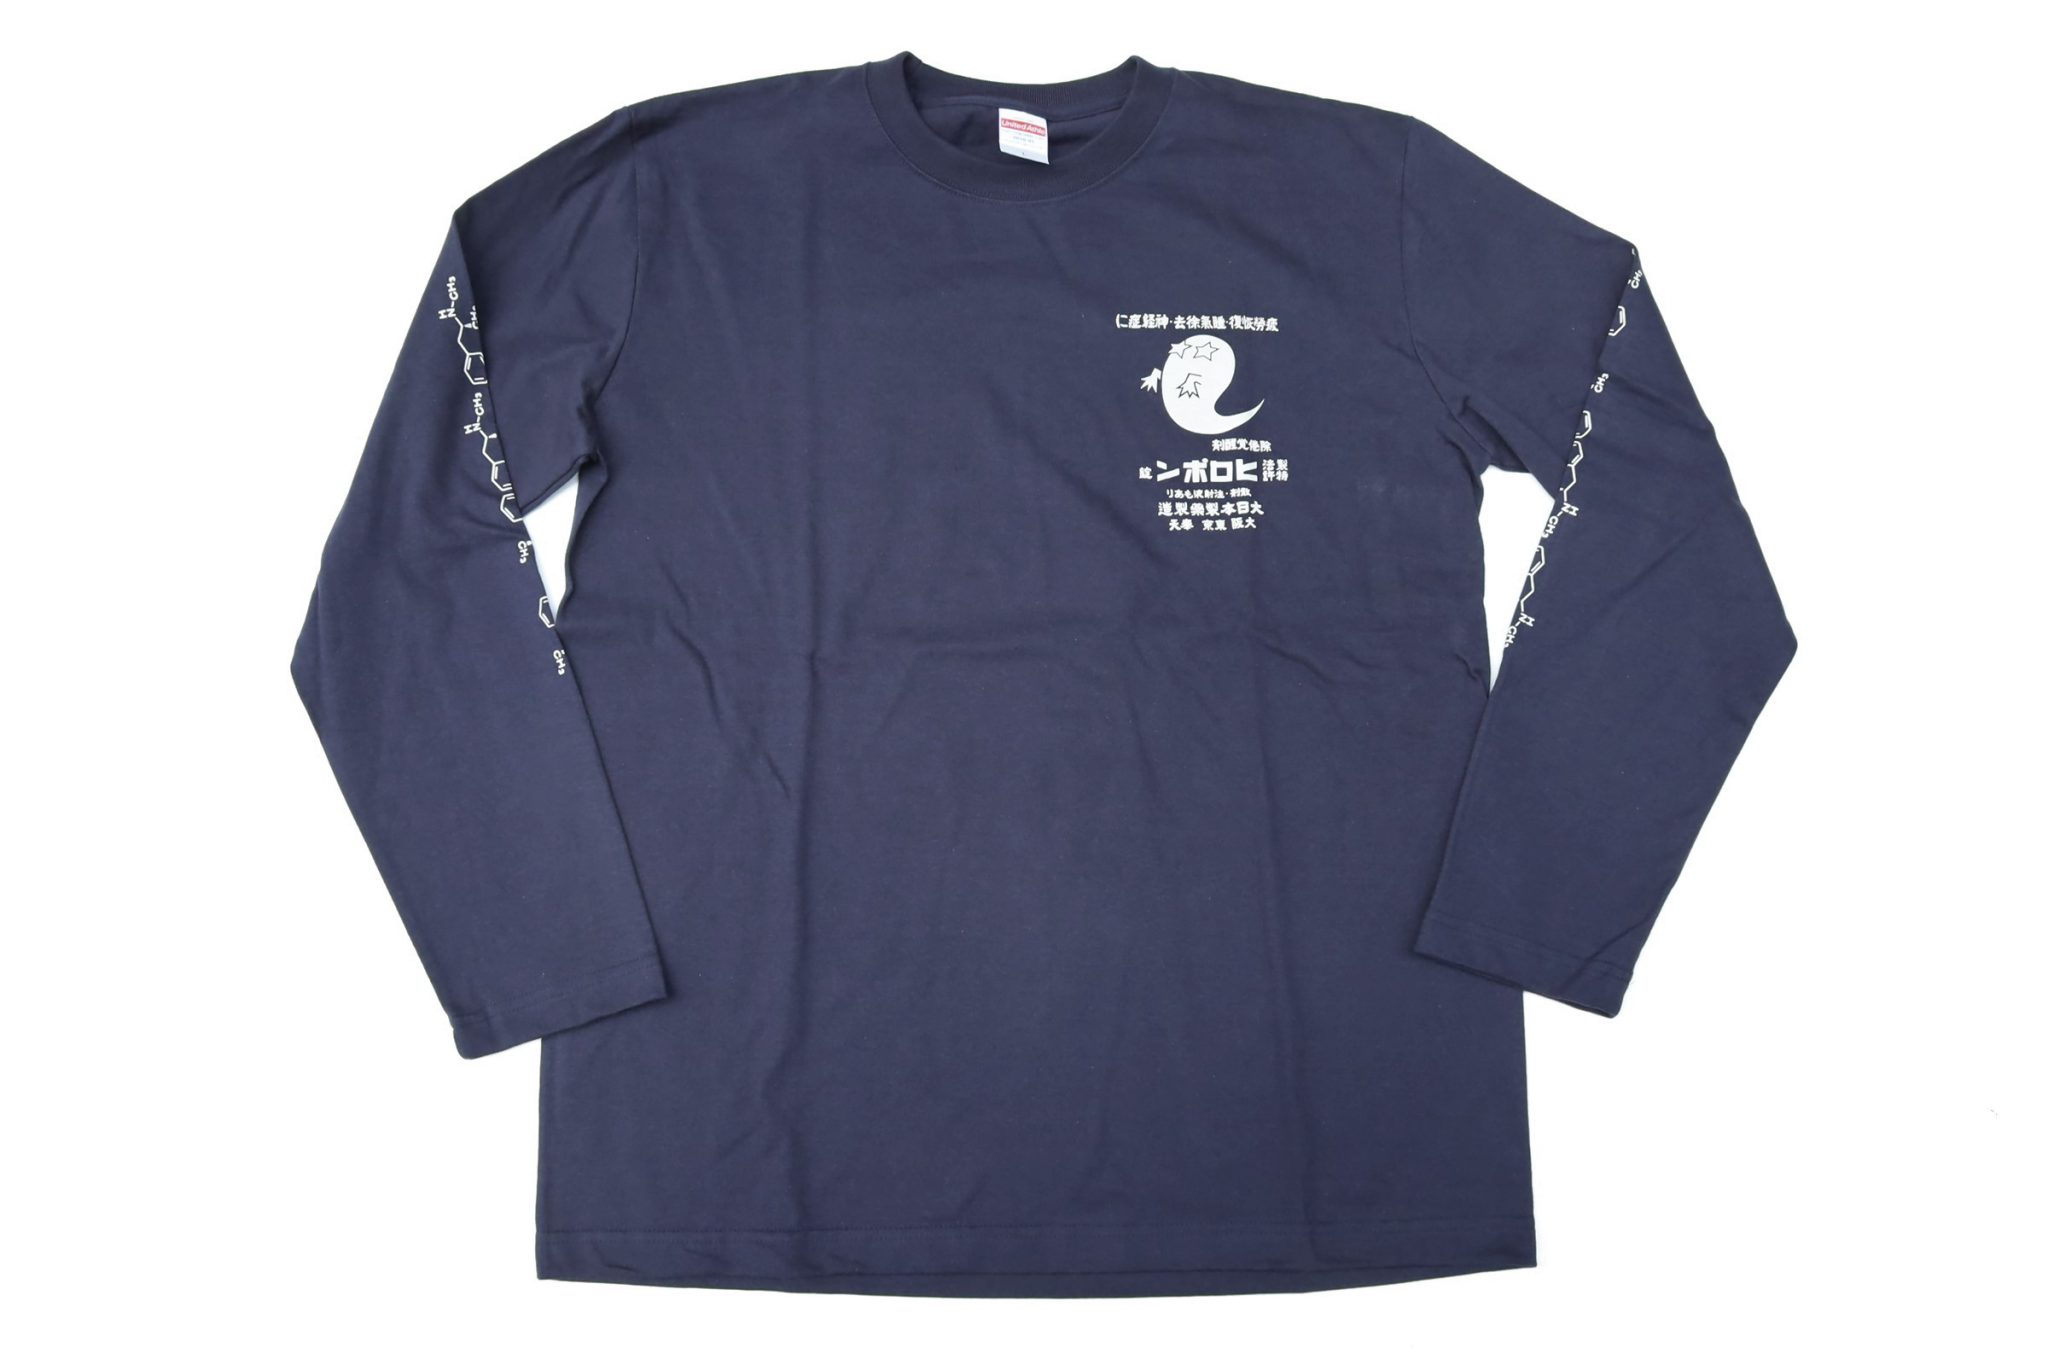 TIGHTBOOTH VOLCANO L/S T-SHIRT プリント 長袖 白 - トップス